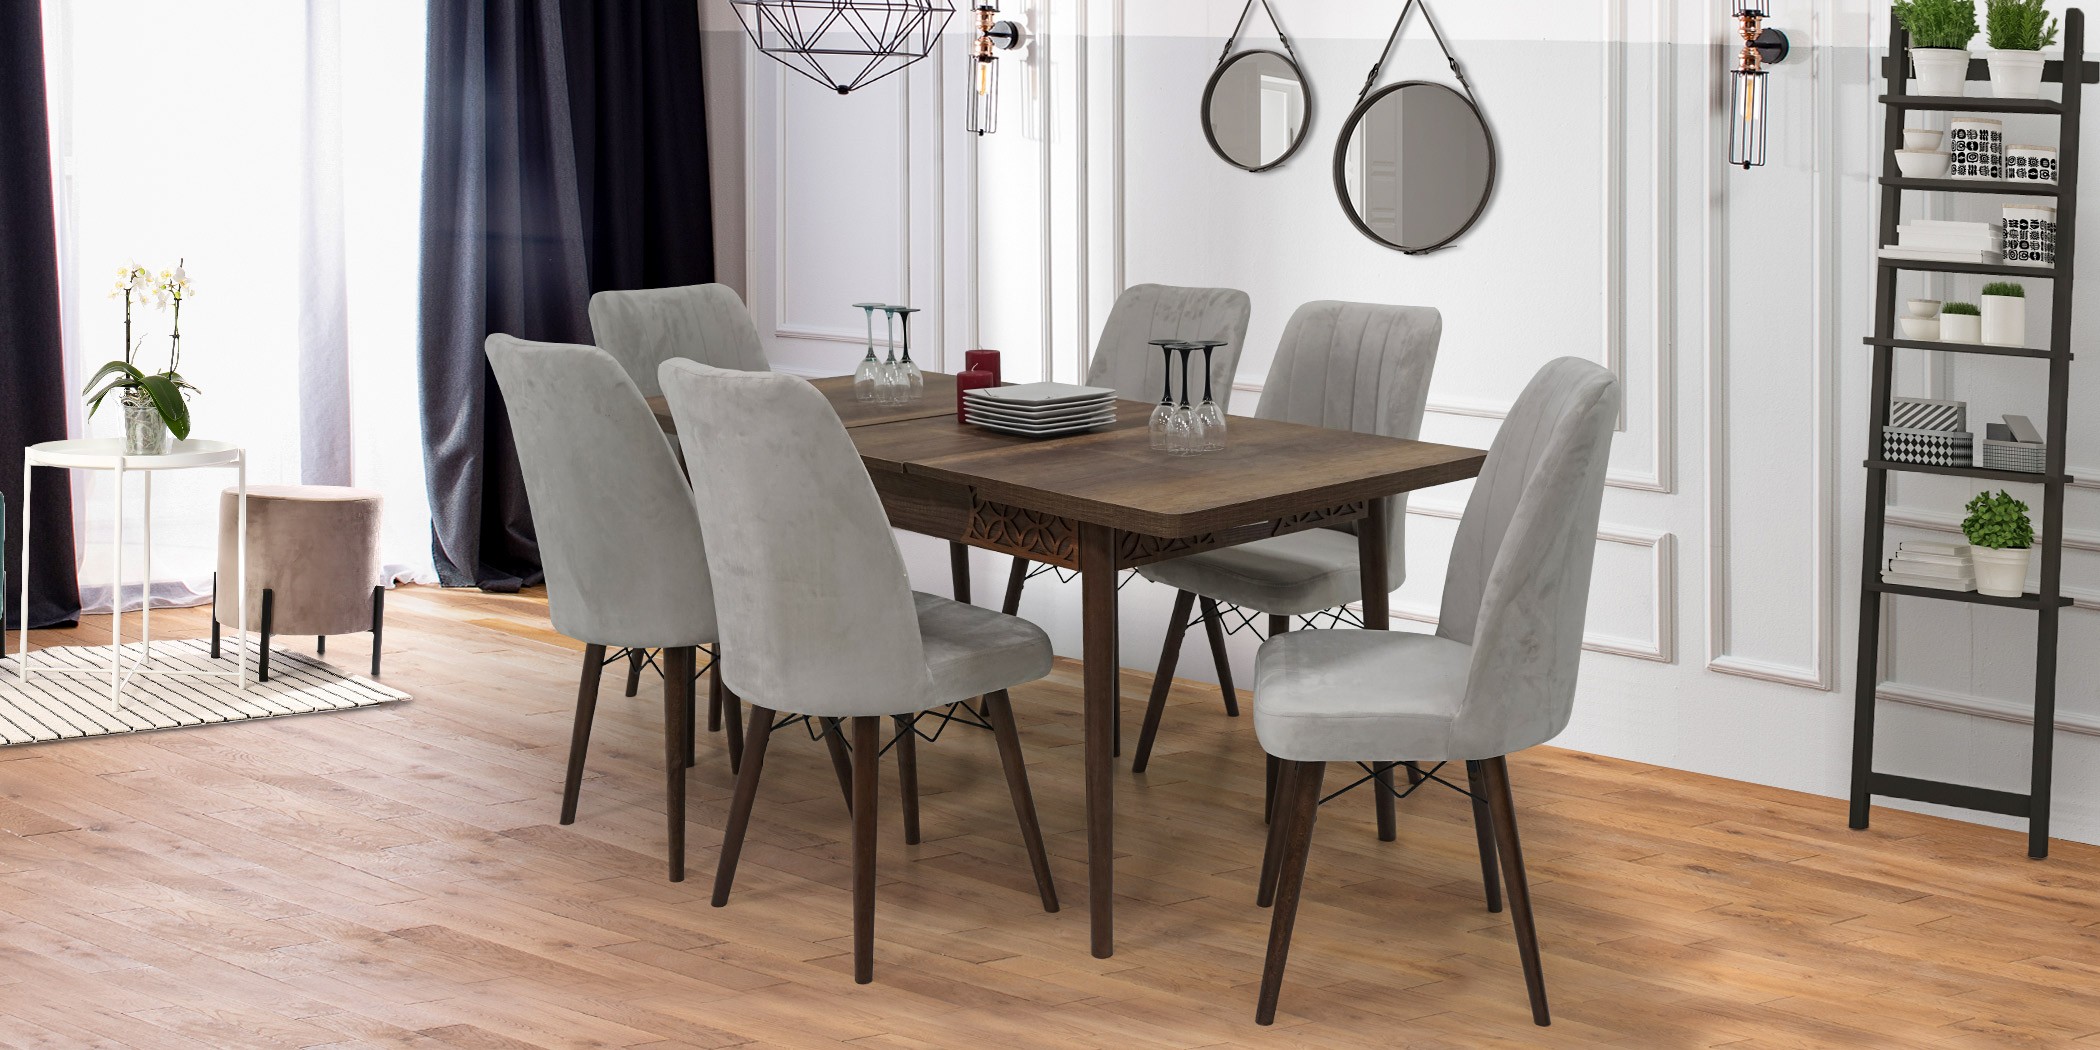 Azra Table & 6 chairs (Extendable) 80 x 170 Grey Fabric